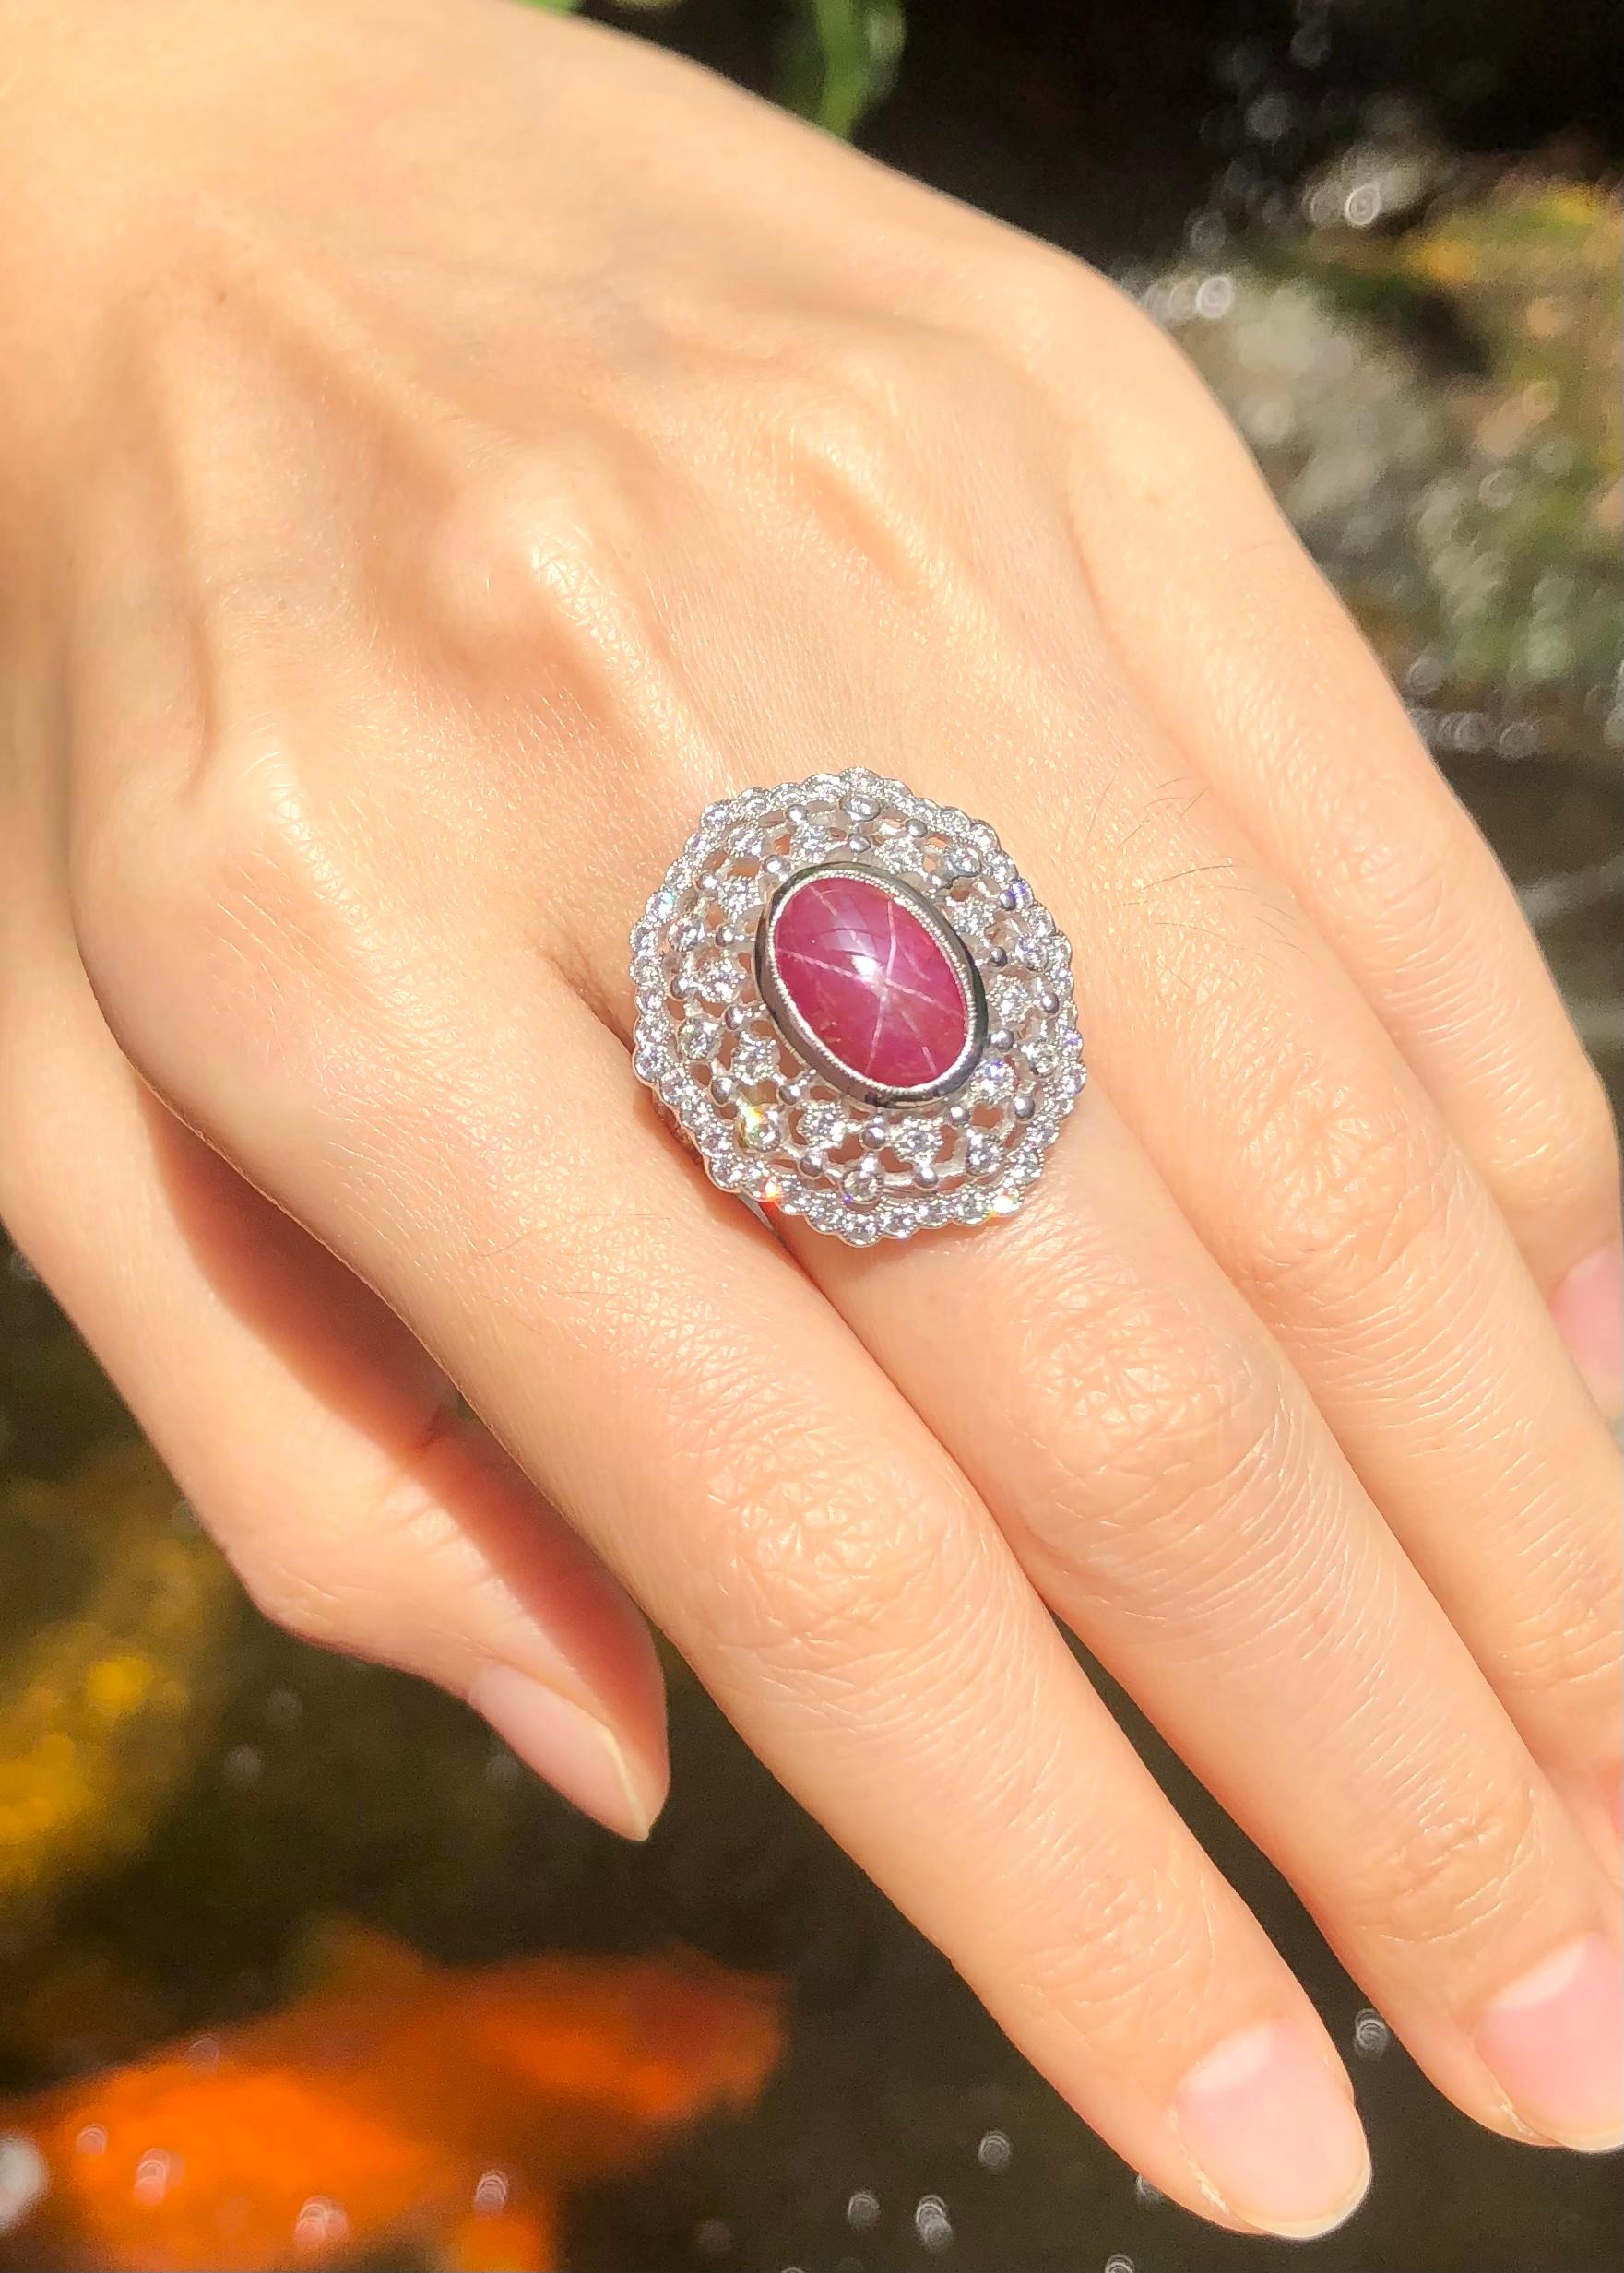 Star Ruby 5.94 carats with Diamond 0.81 carat Ring set in 18 Karat White Gold Settings

Width:  2.0 cm 
Length: 2.5 cm
Ring Size: 53
Total Weight: 9.46 grams


